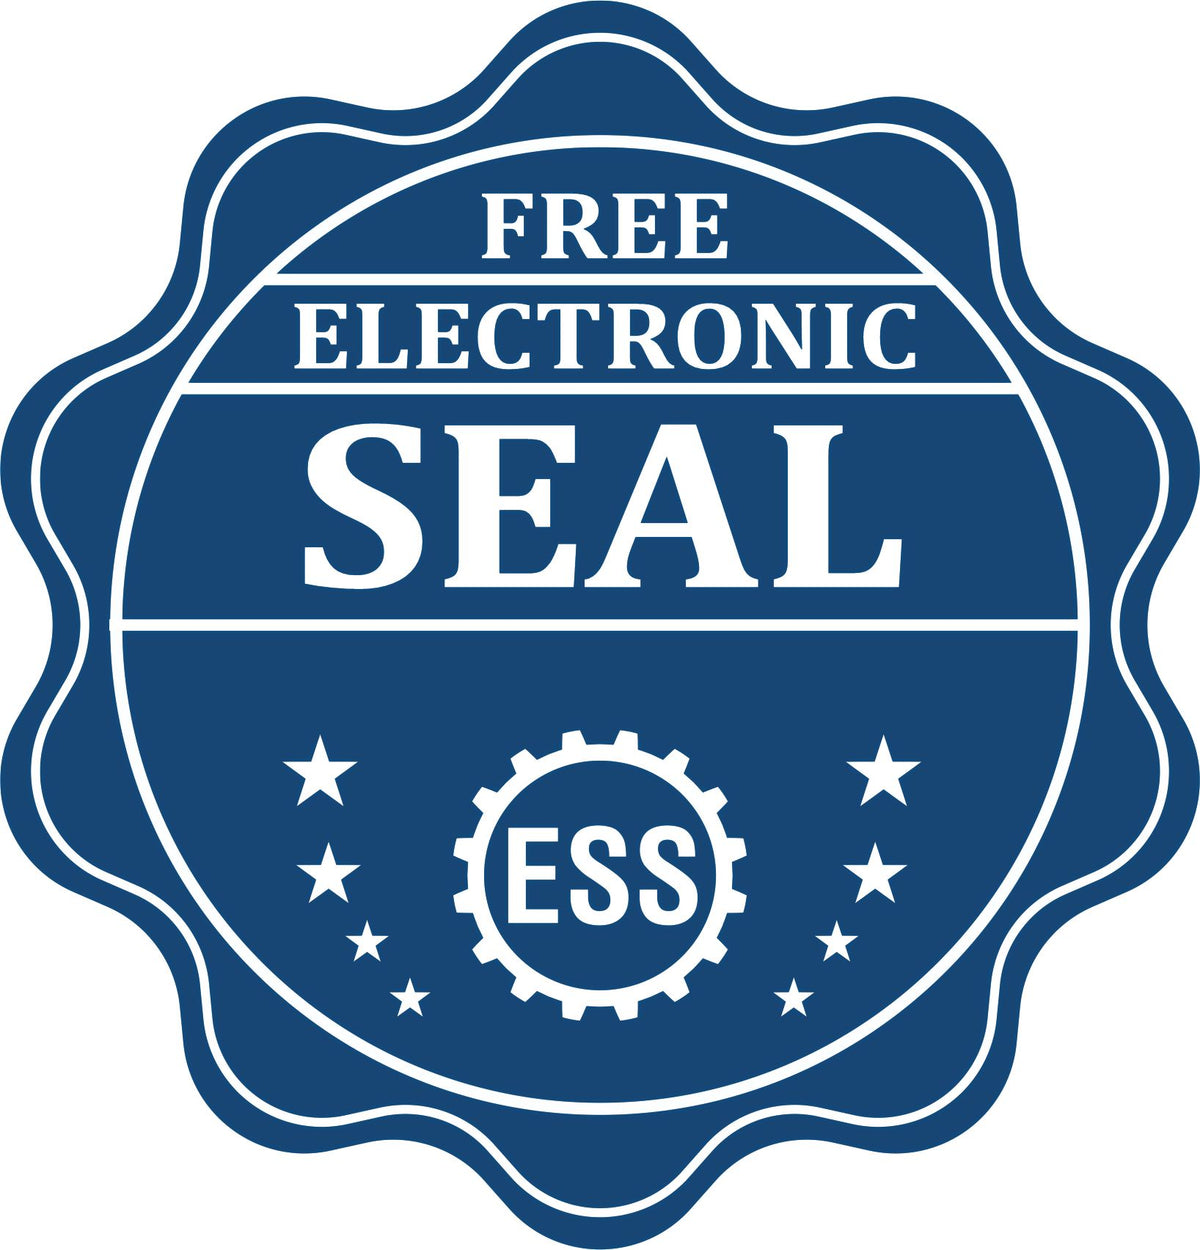 A badge showing a free electronic seal for the MaxLight Premium Pre-Inked Puerto Rico Rectangular Notarial Stamp with stars and the ESS gear on the emblem.